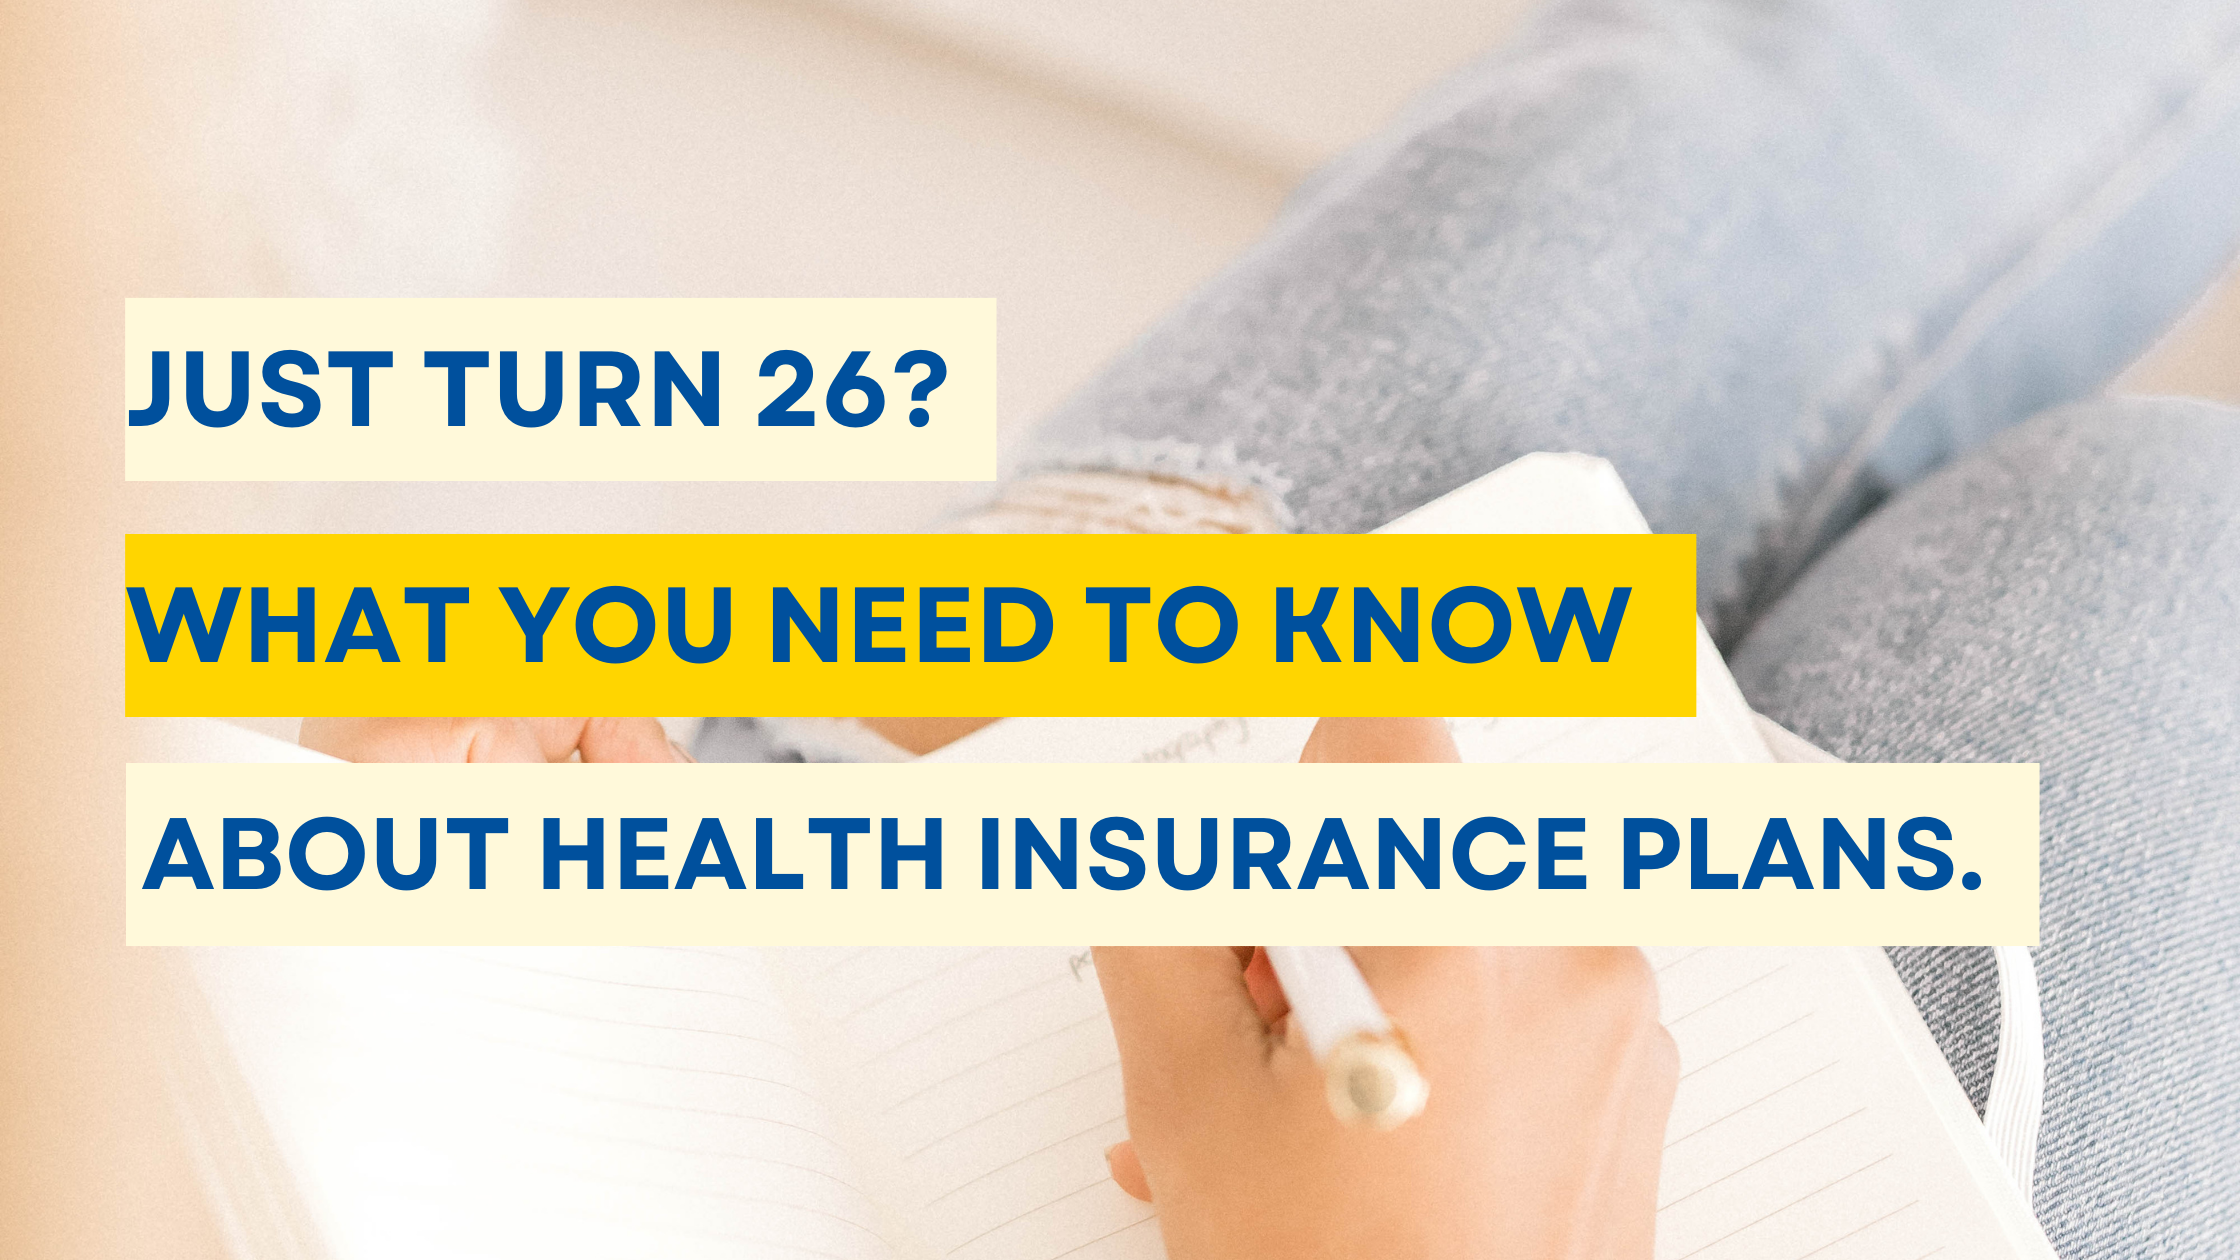 Just Turned 26? What You Need to Know About Health Insurance Plans